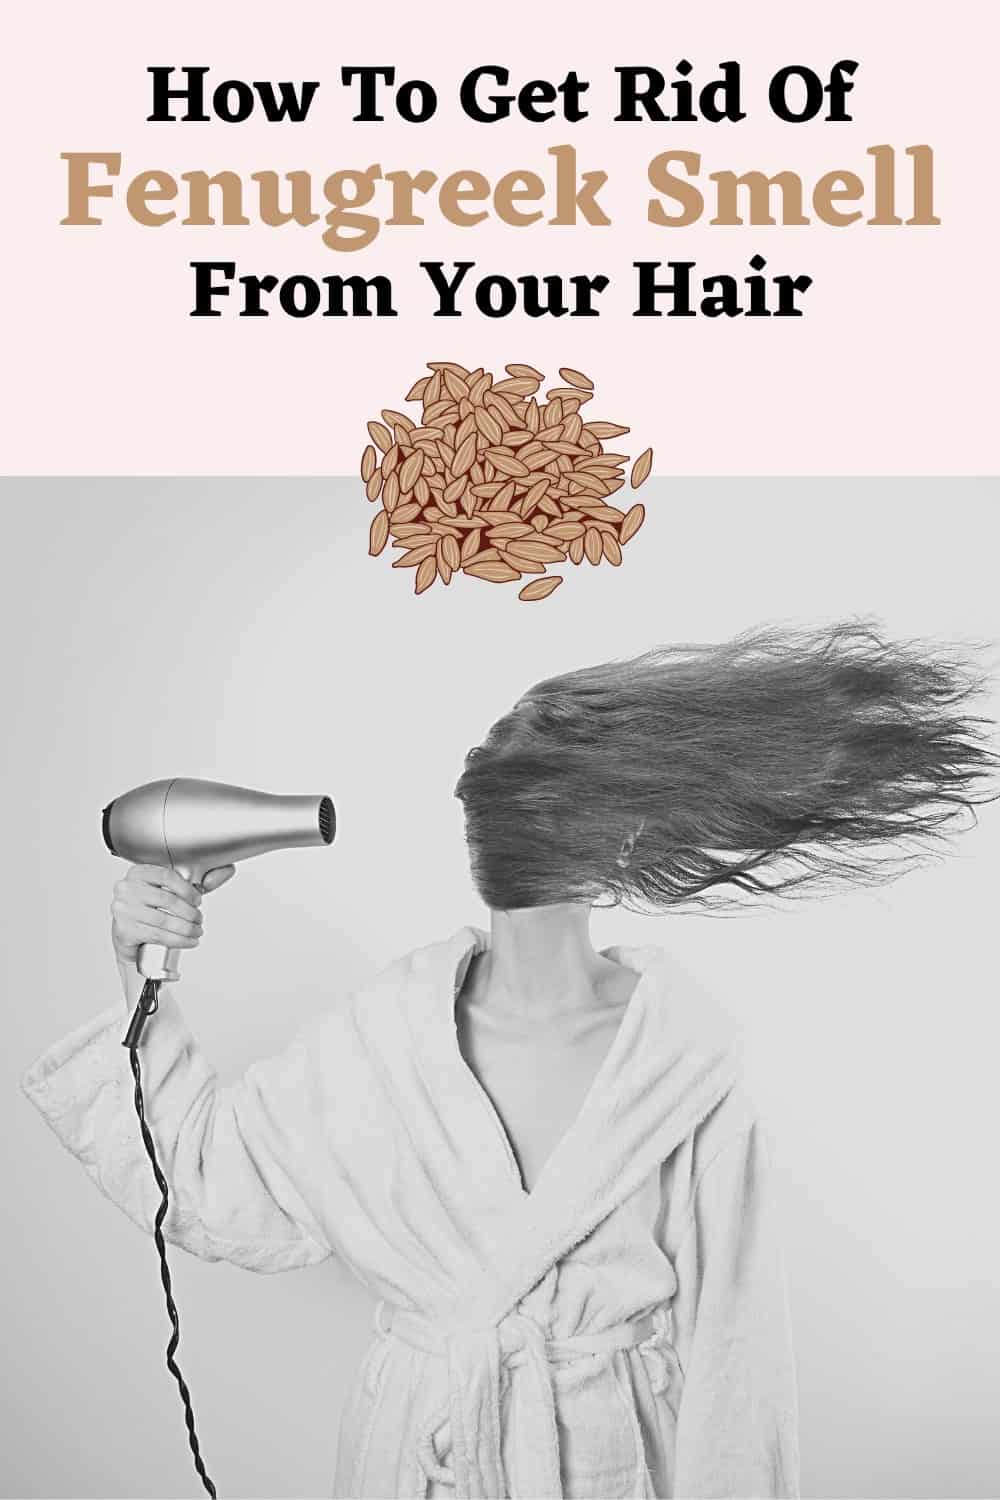 Wash your hair with apple cider vinegar to get rid of fenugreek smell